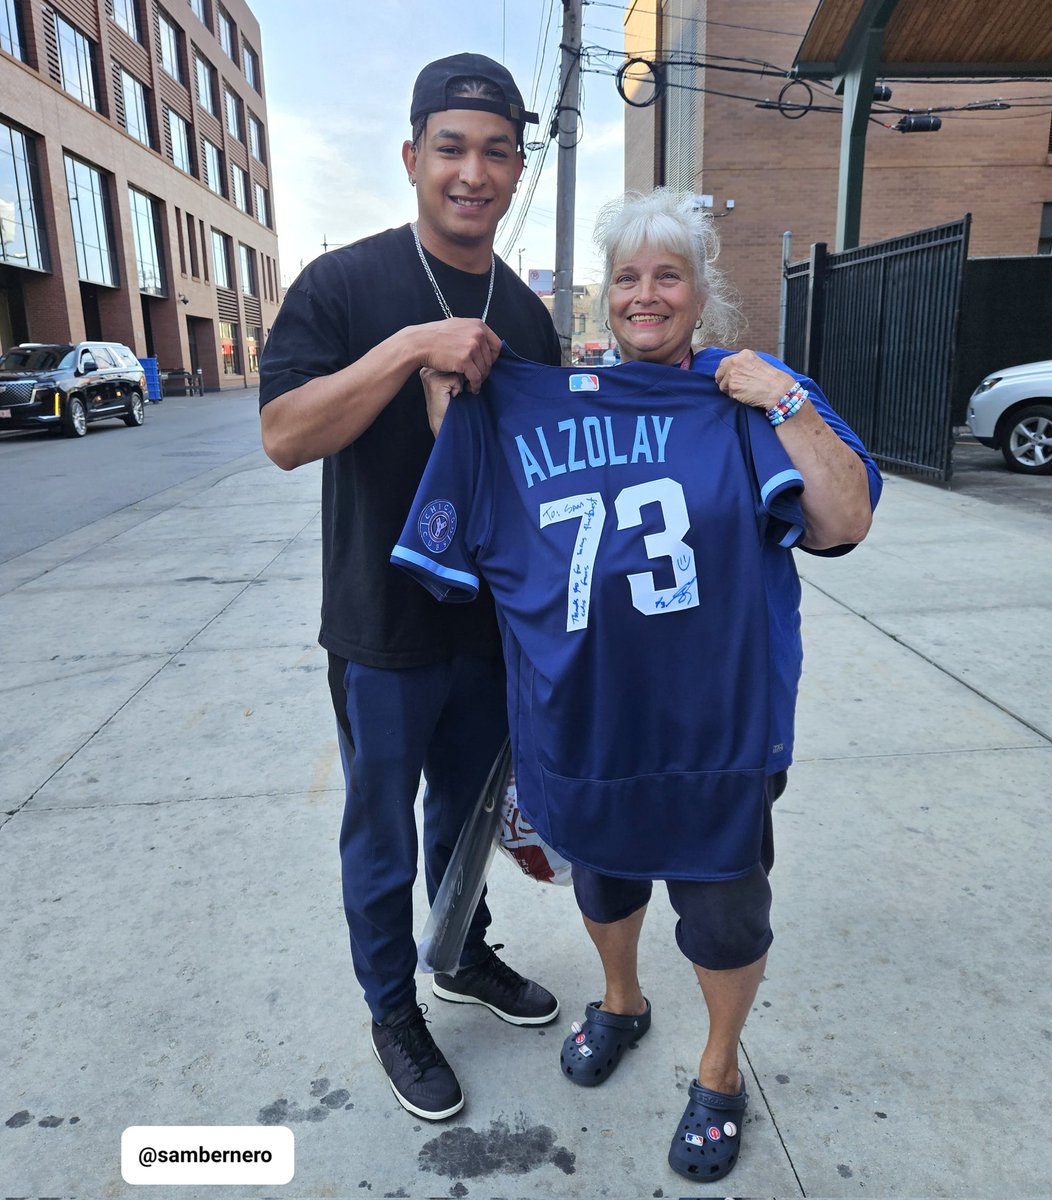 OMG! Adbert Alzolay gave me a autographed jersey as he left Wrigley Field today after packing up his stuff. I was so shocked. I cried happy tears. It meant so much to me. @adbert29 words can't express how happy I am and how much I thank u xo #Cubs